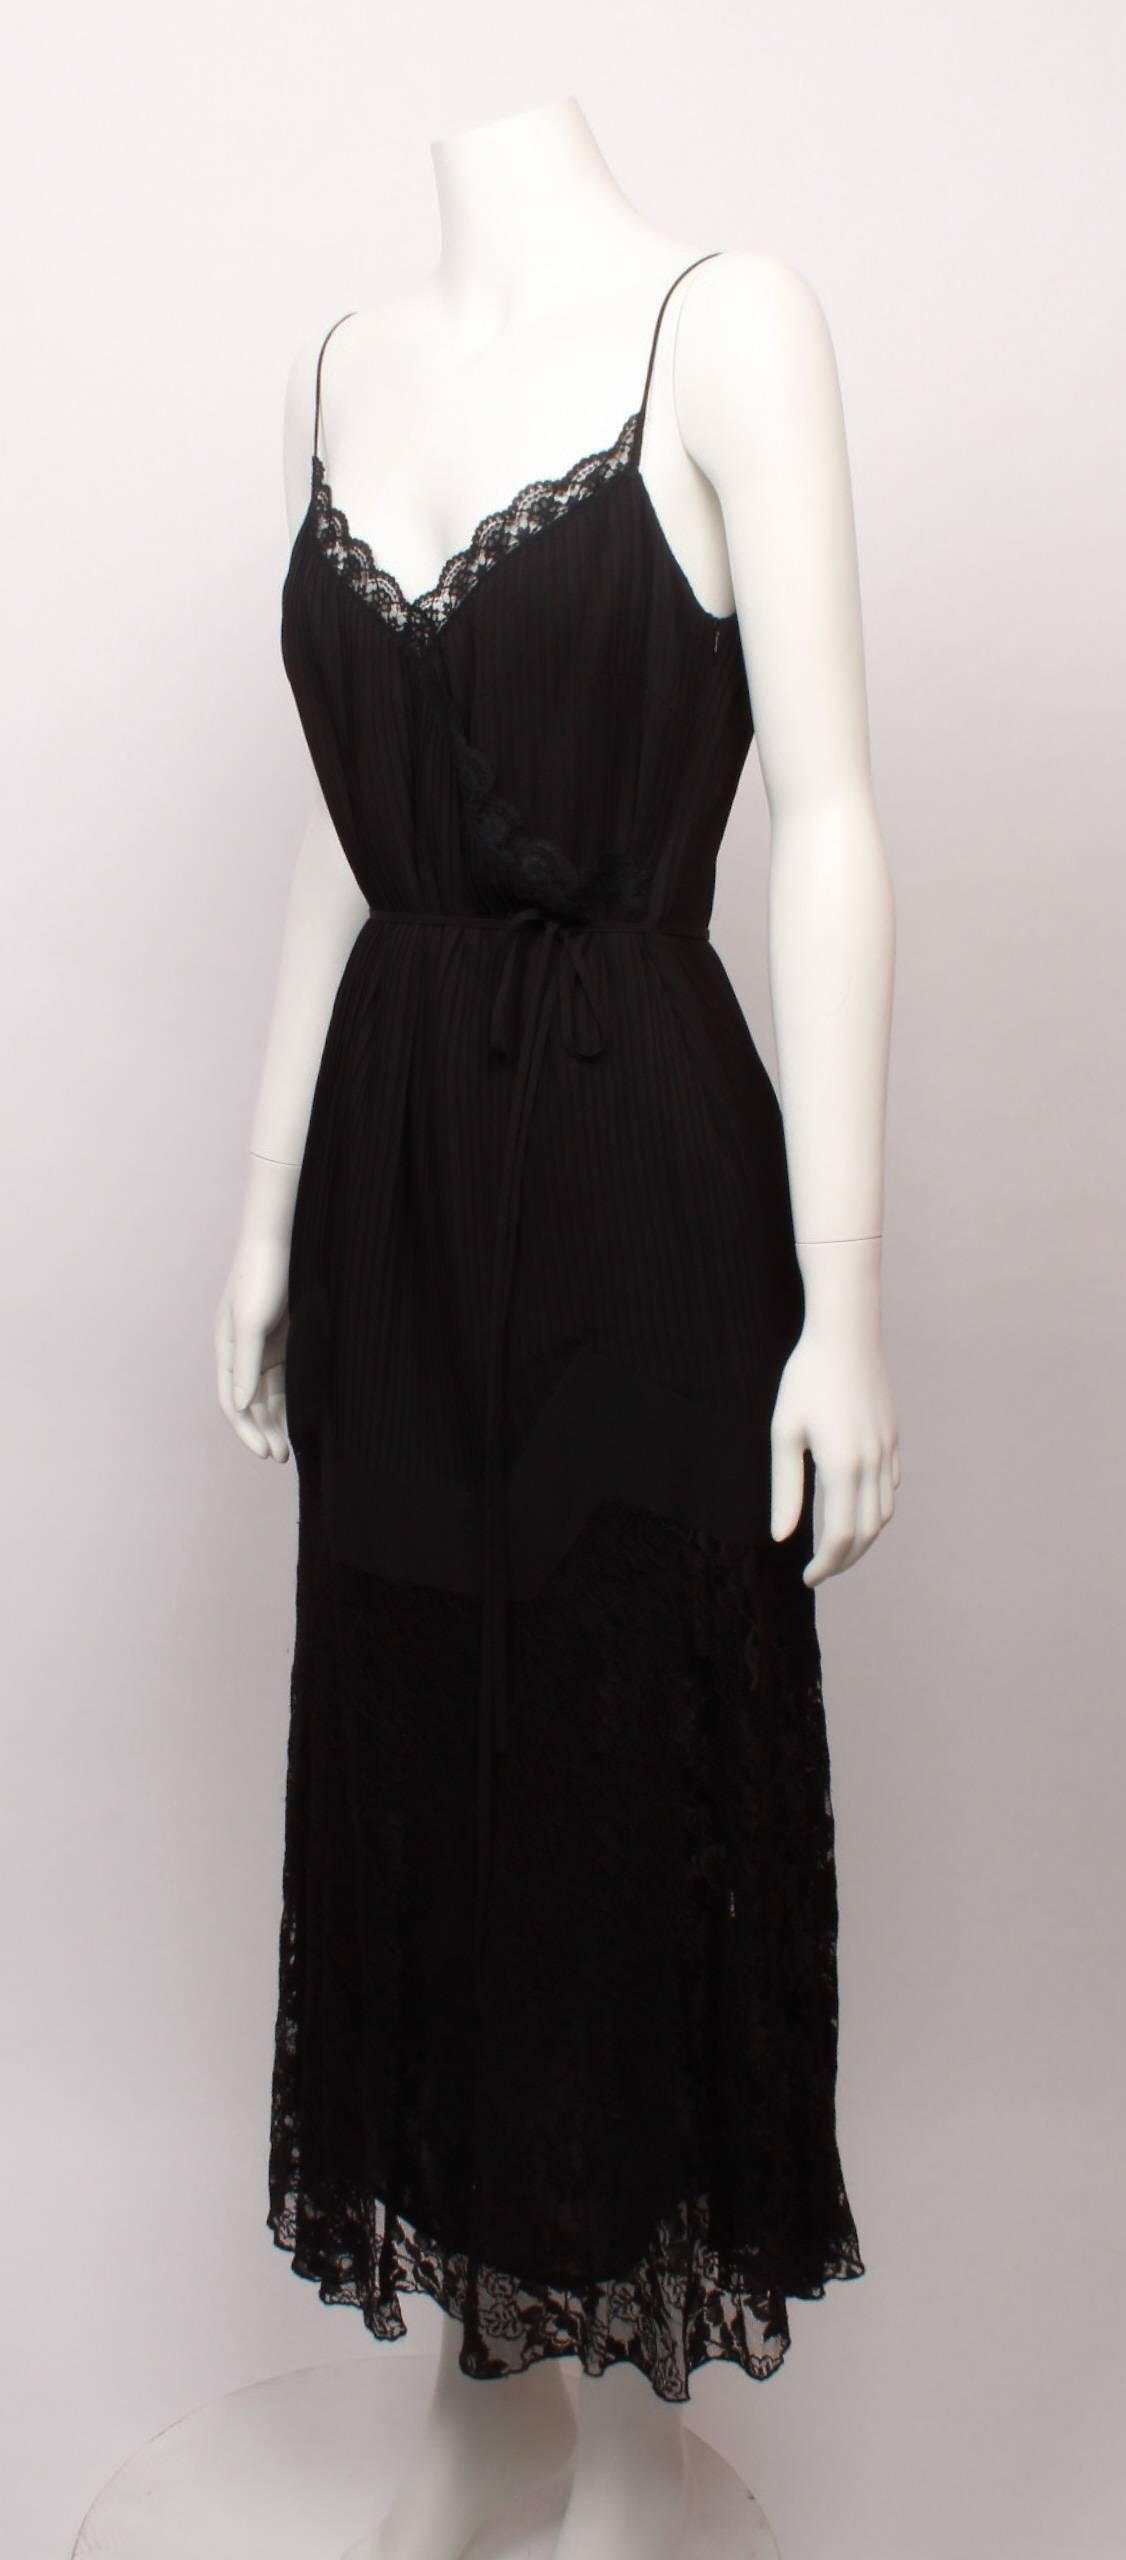 Final Sale  - No further discounts

John Paul Gaultier Maille black pleated cocktail dress. 
Features spaghetti straps and wrap front knife pleated bodice with delicate lace trim. Slightly flared pleated skirt with solid and lace curved panels at